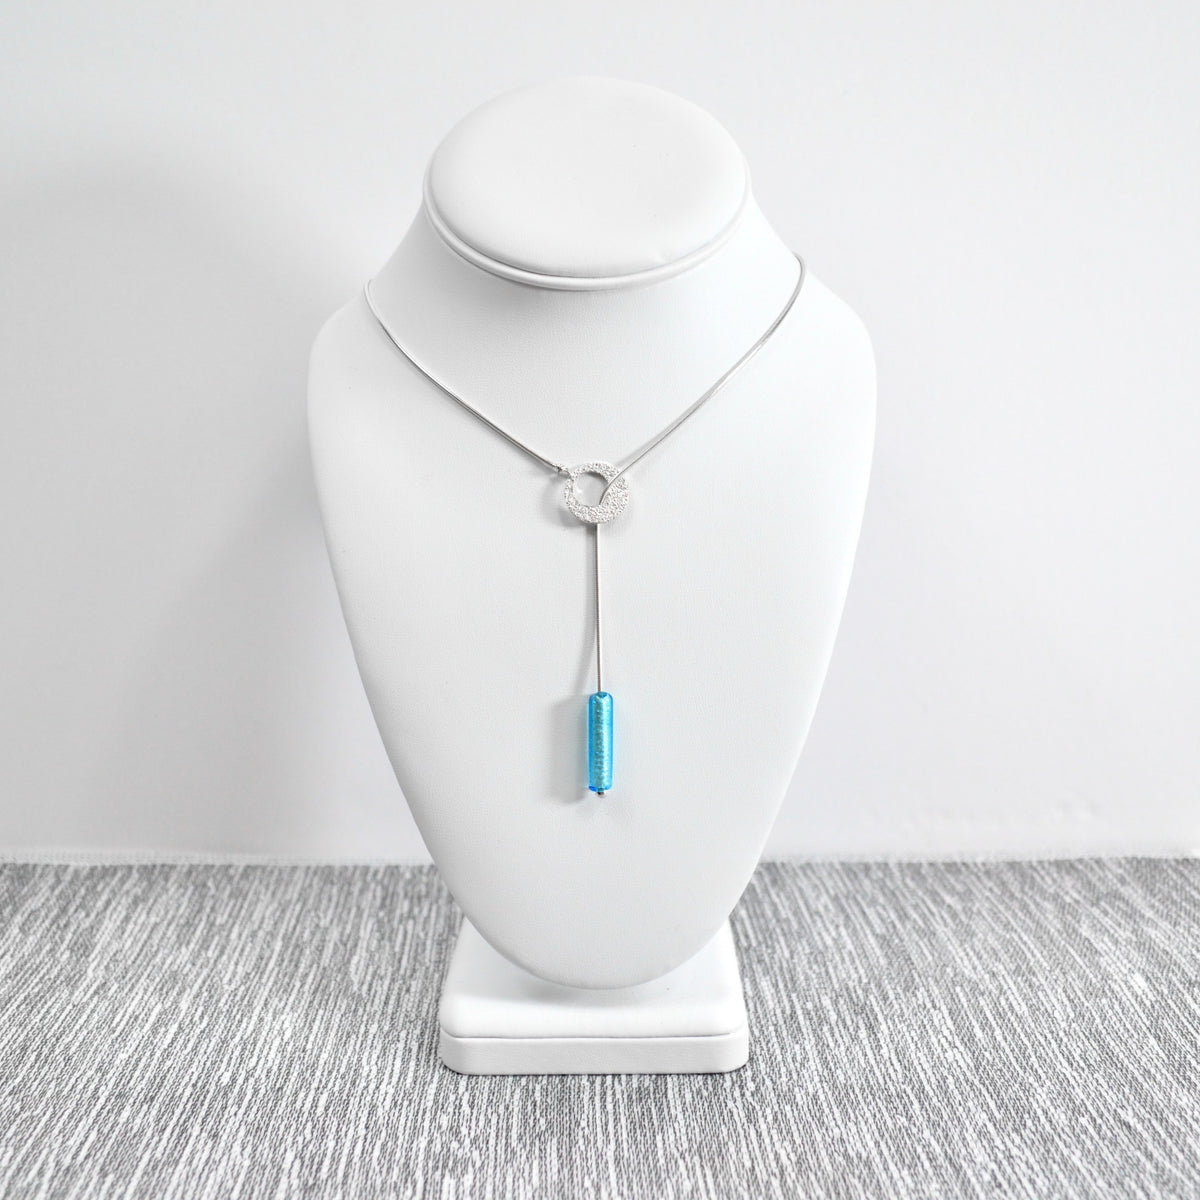 Siena Silver and Murano Glass Necklace, Earrings, Ocean Blue - My Italian Decor